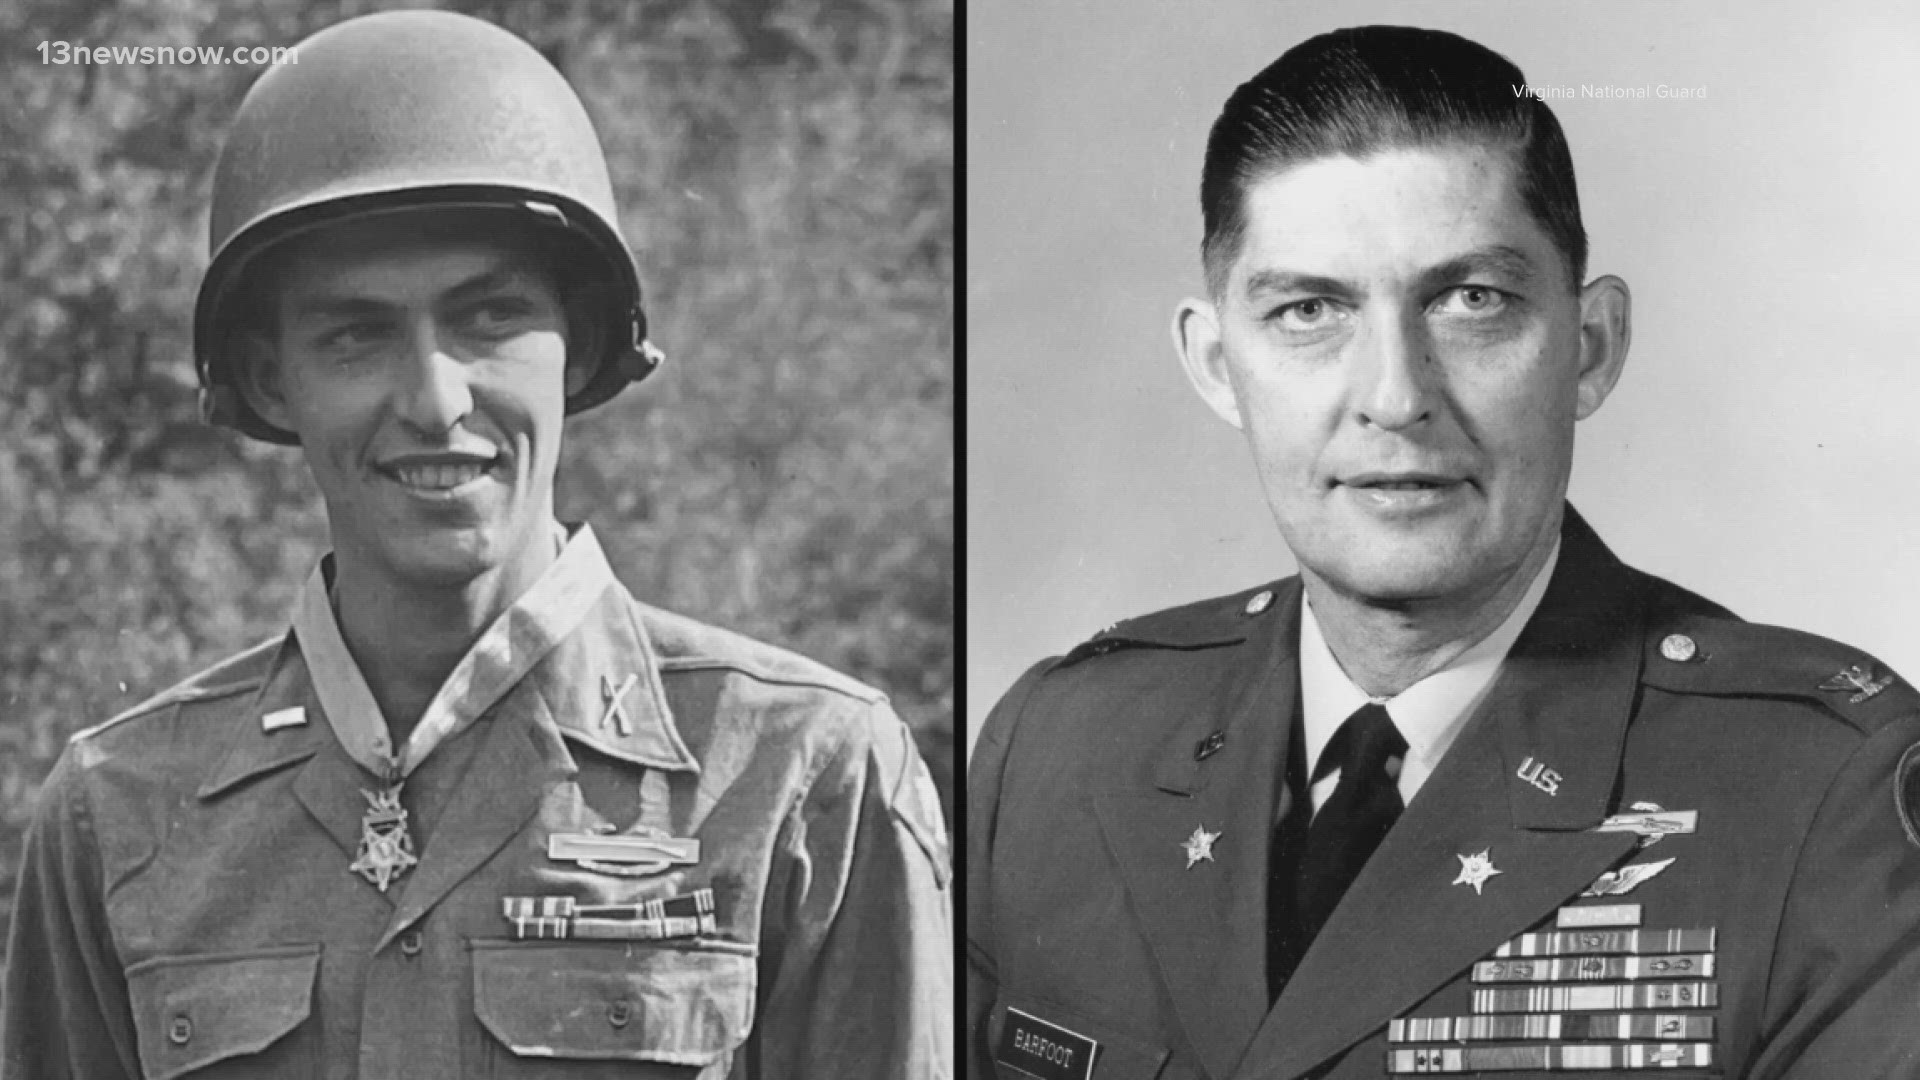 On Friday, the Army National Guard post will be officially re-designated Fort Barfoot in honor of Colonel Van T. Barfoot, a World War II Medal of Honor recipient.